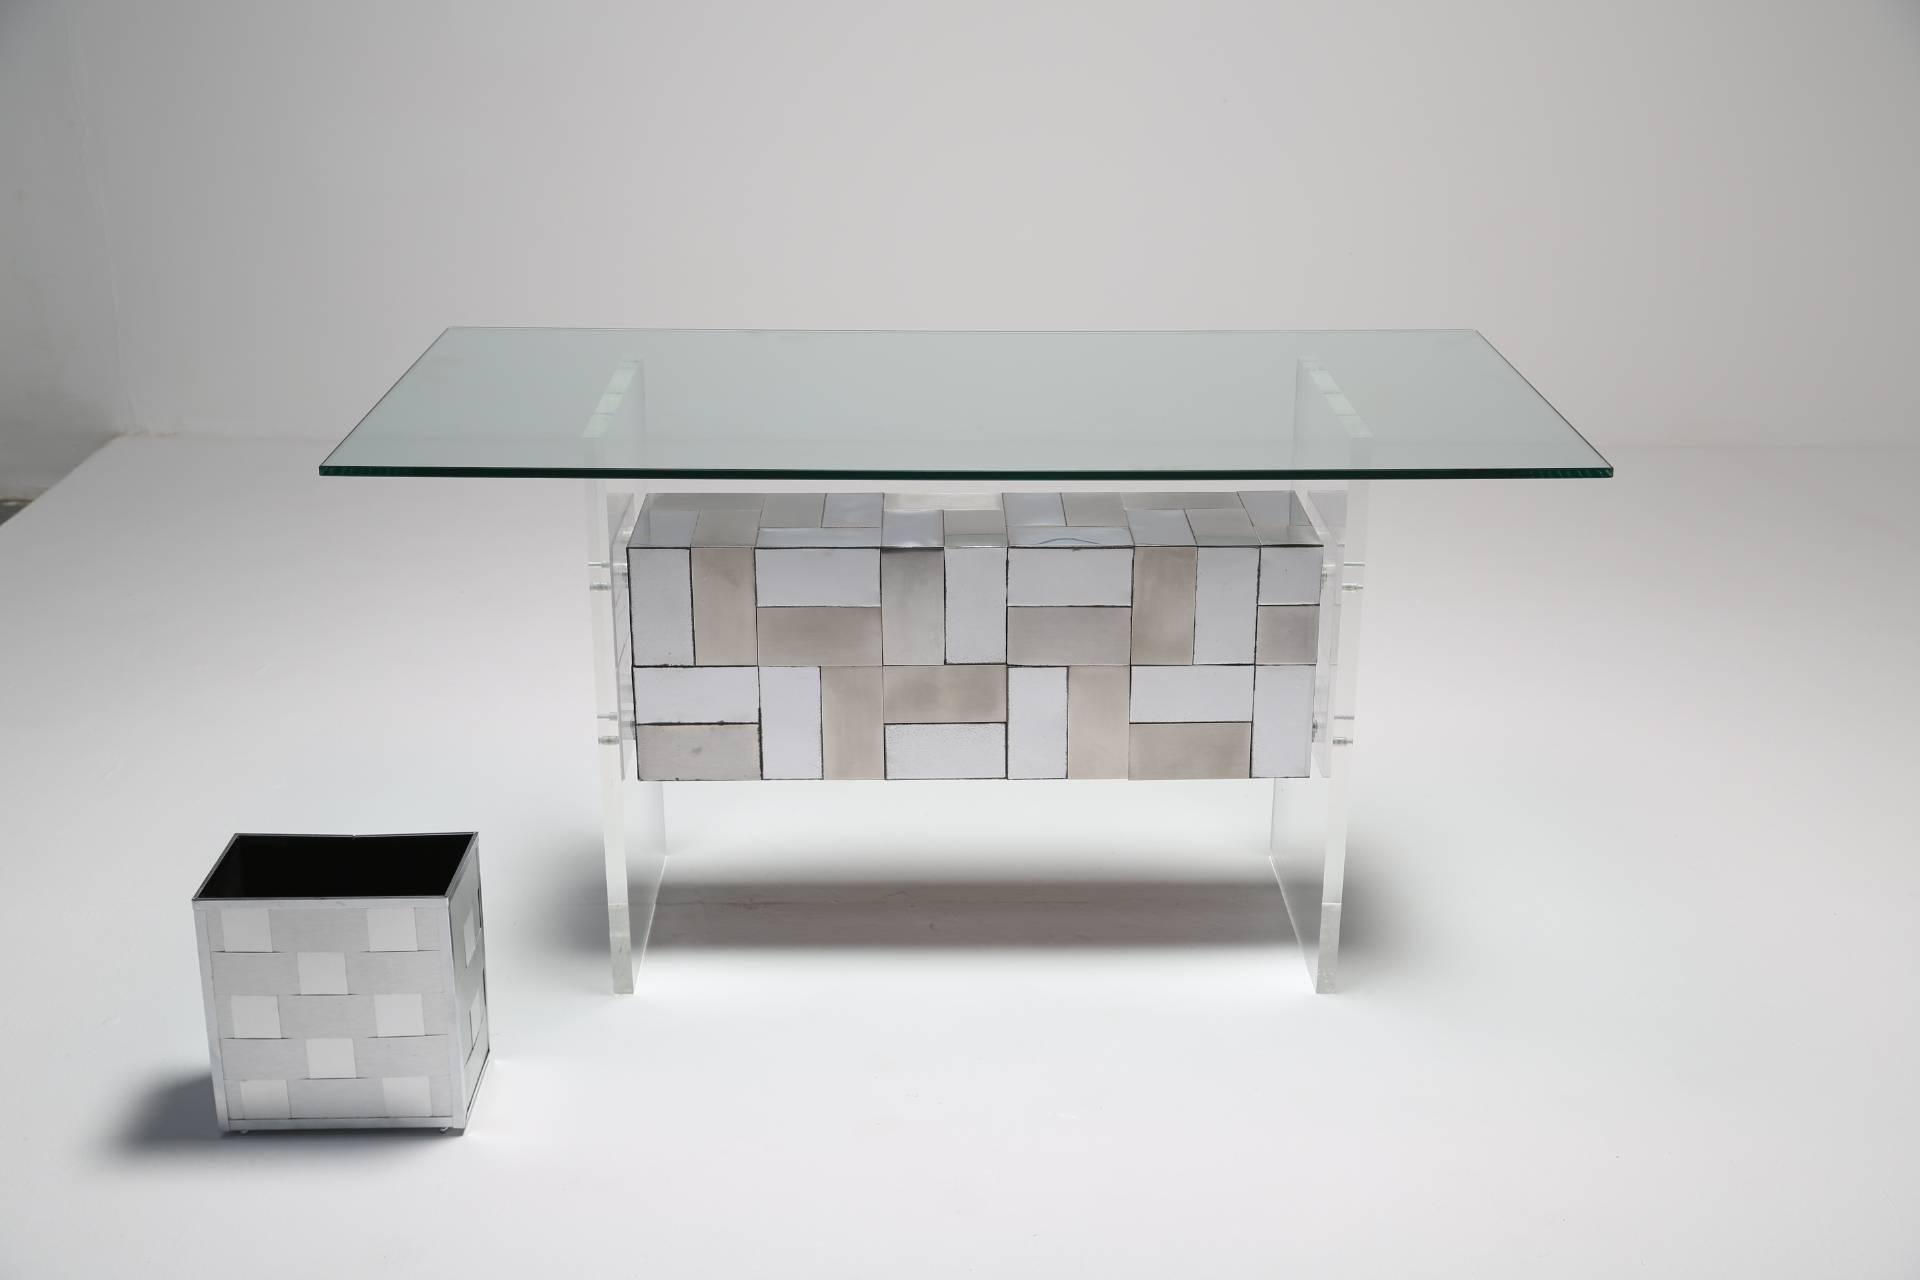 This striking 'cityscape' patchwork desk in Lucite, glass and chrome is designed in the style of Paul Evans and complimented by a wastepaper basket and desk tidy. The desk is set on a Lucite frame with a 'cityscape' style patchwork chrome tiled